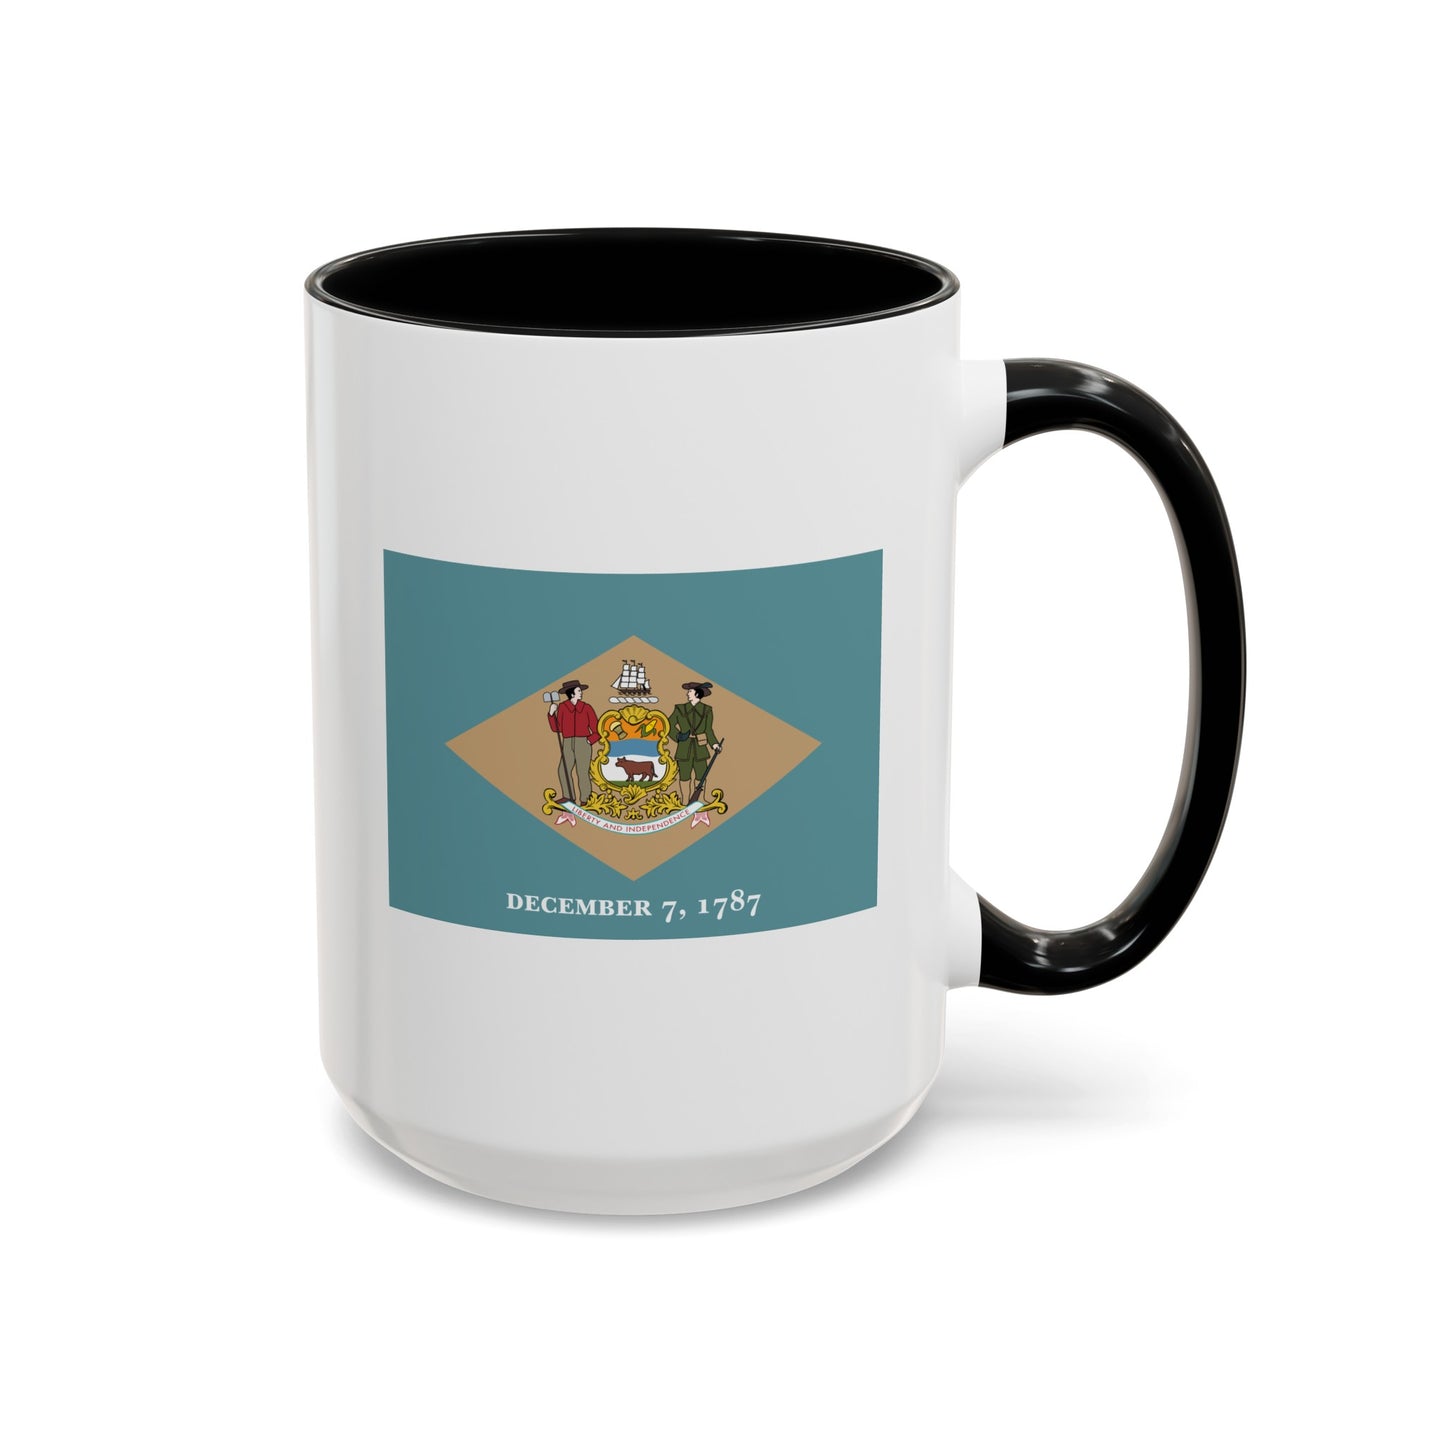 Delaware State Flag - Double Sided Black Accent White Ceramic Coffee Mug 15oz by TheGlassyLass.com